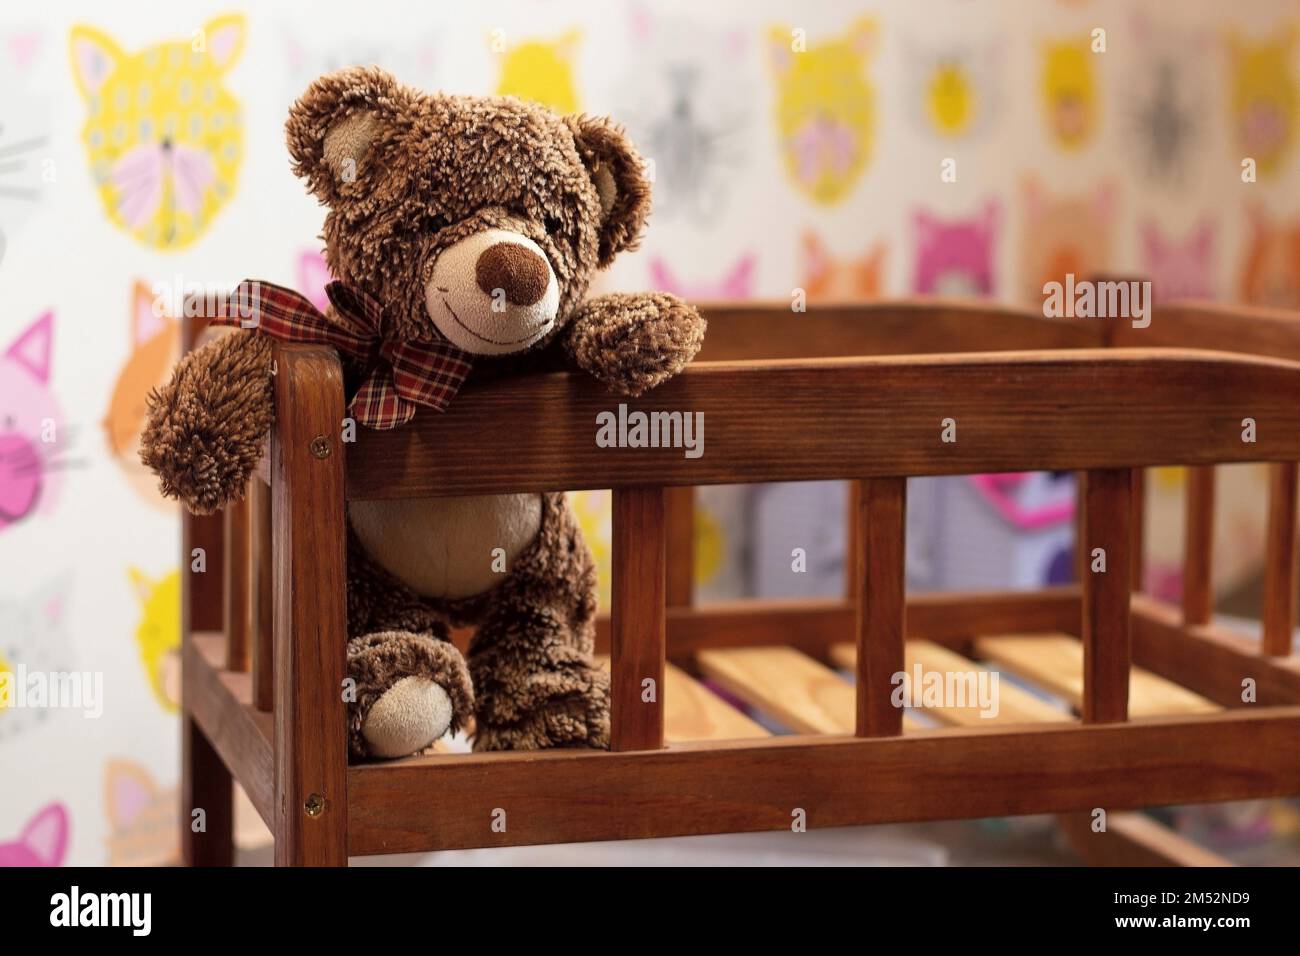 soft brown teddy bear sits in a children's wooden bed in a children's room on a blurred background Stock Photo